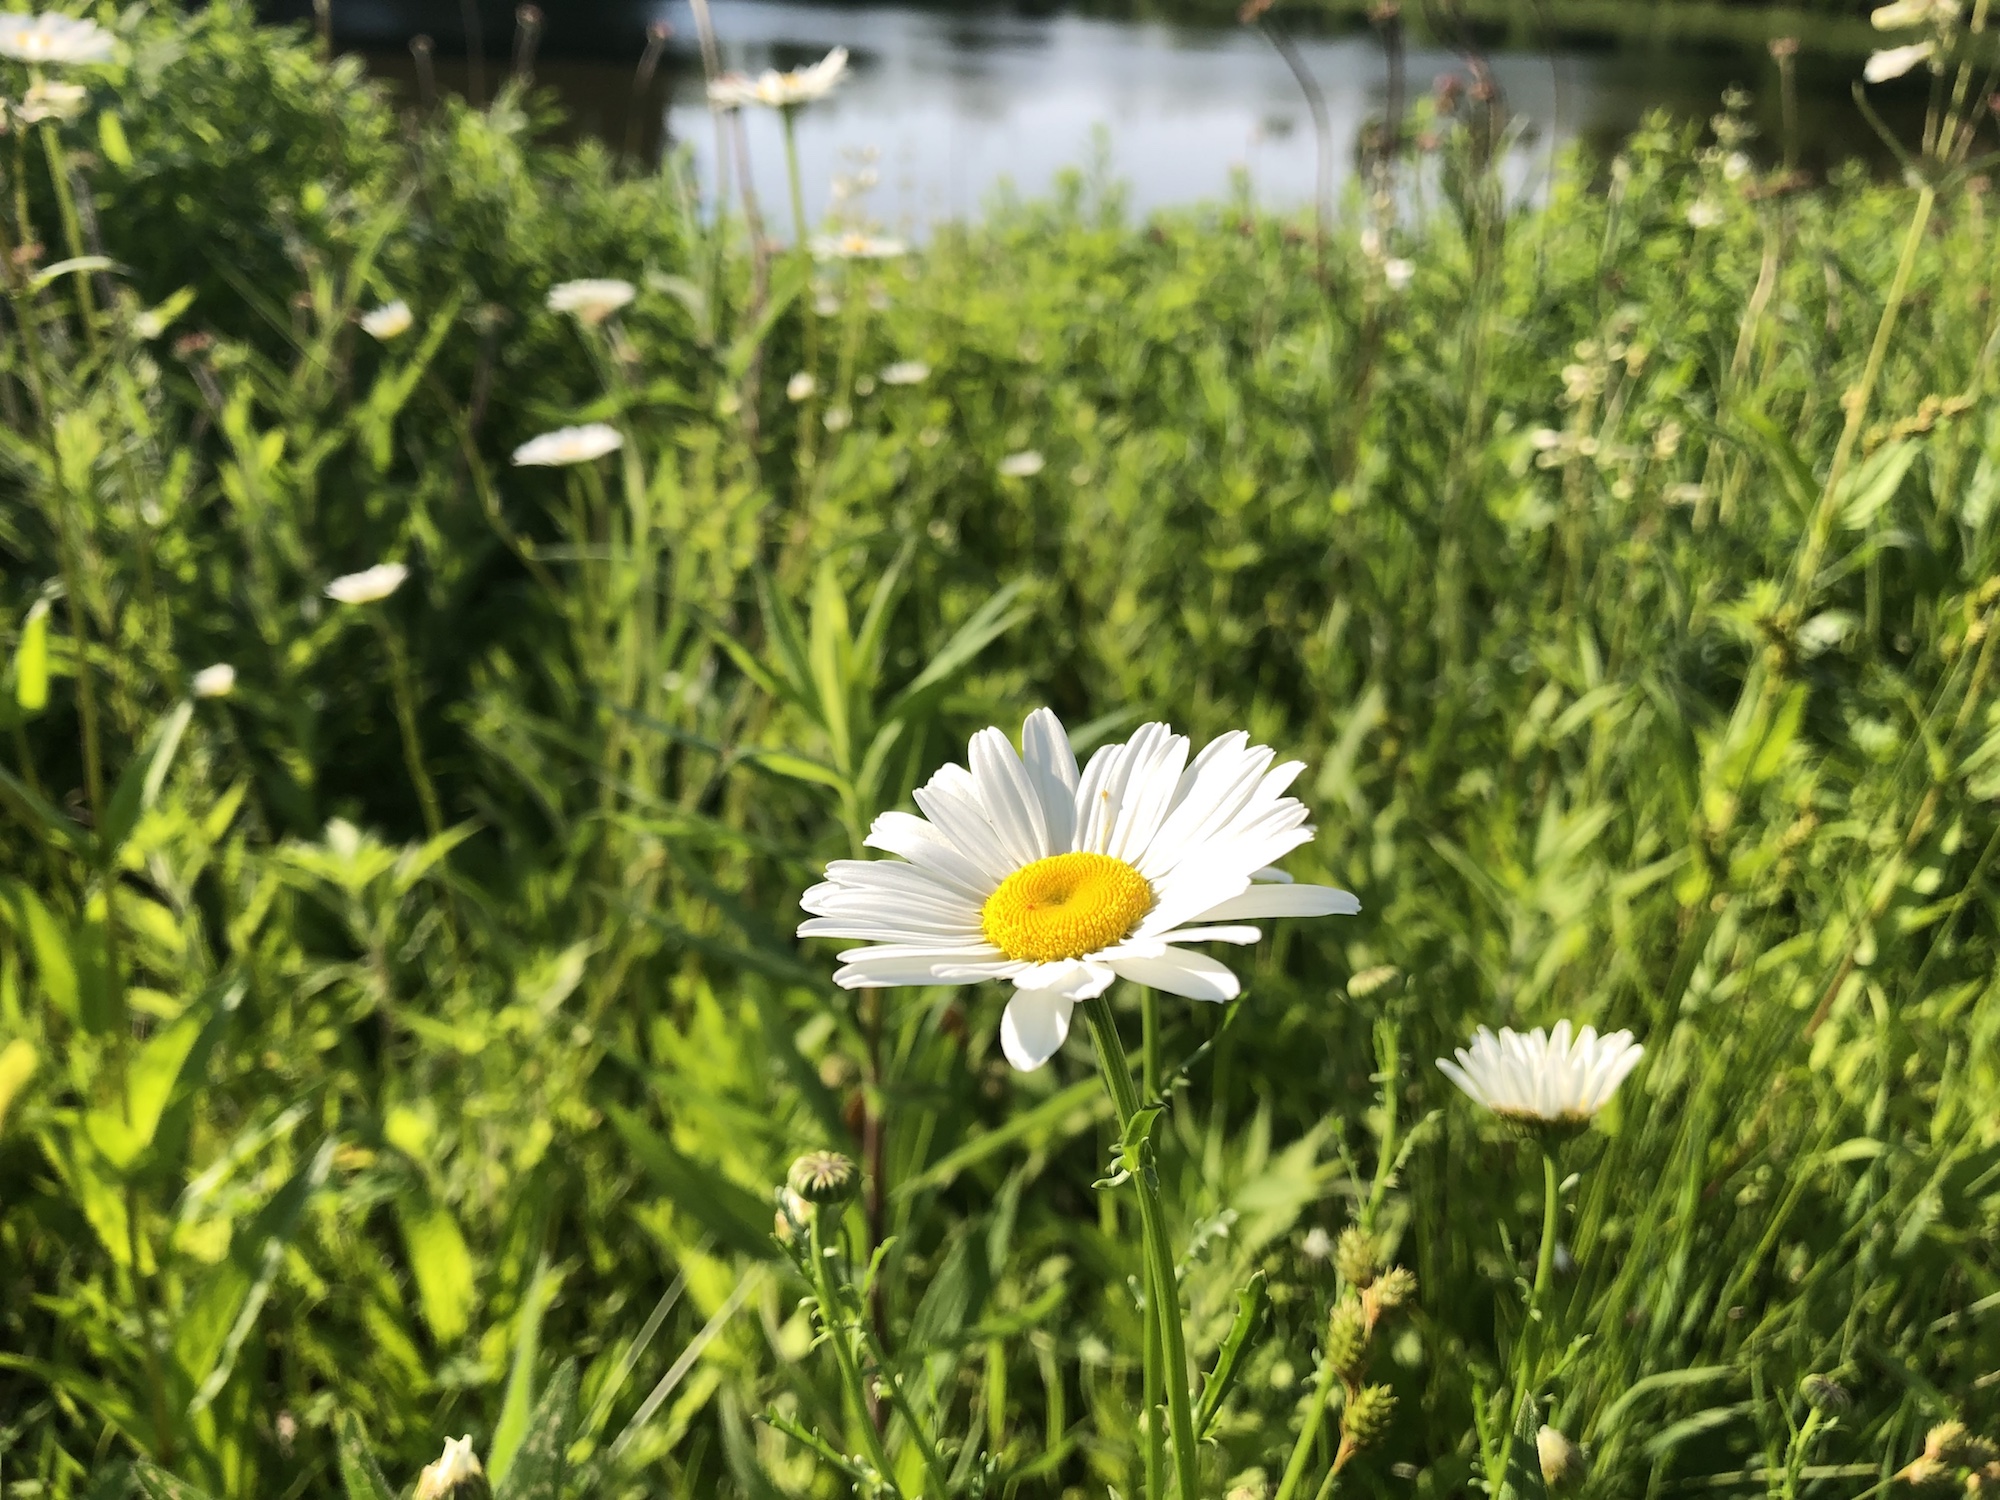 Daisies on bank of retaining pond at the corner of Manitou Way and Nakoma Road in Madison, Wisconsin on June 15, 2019.